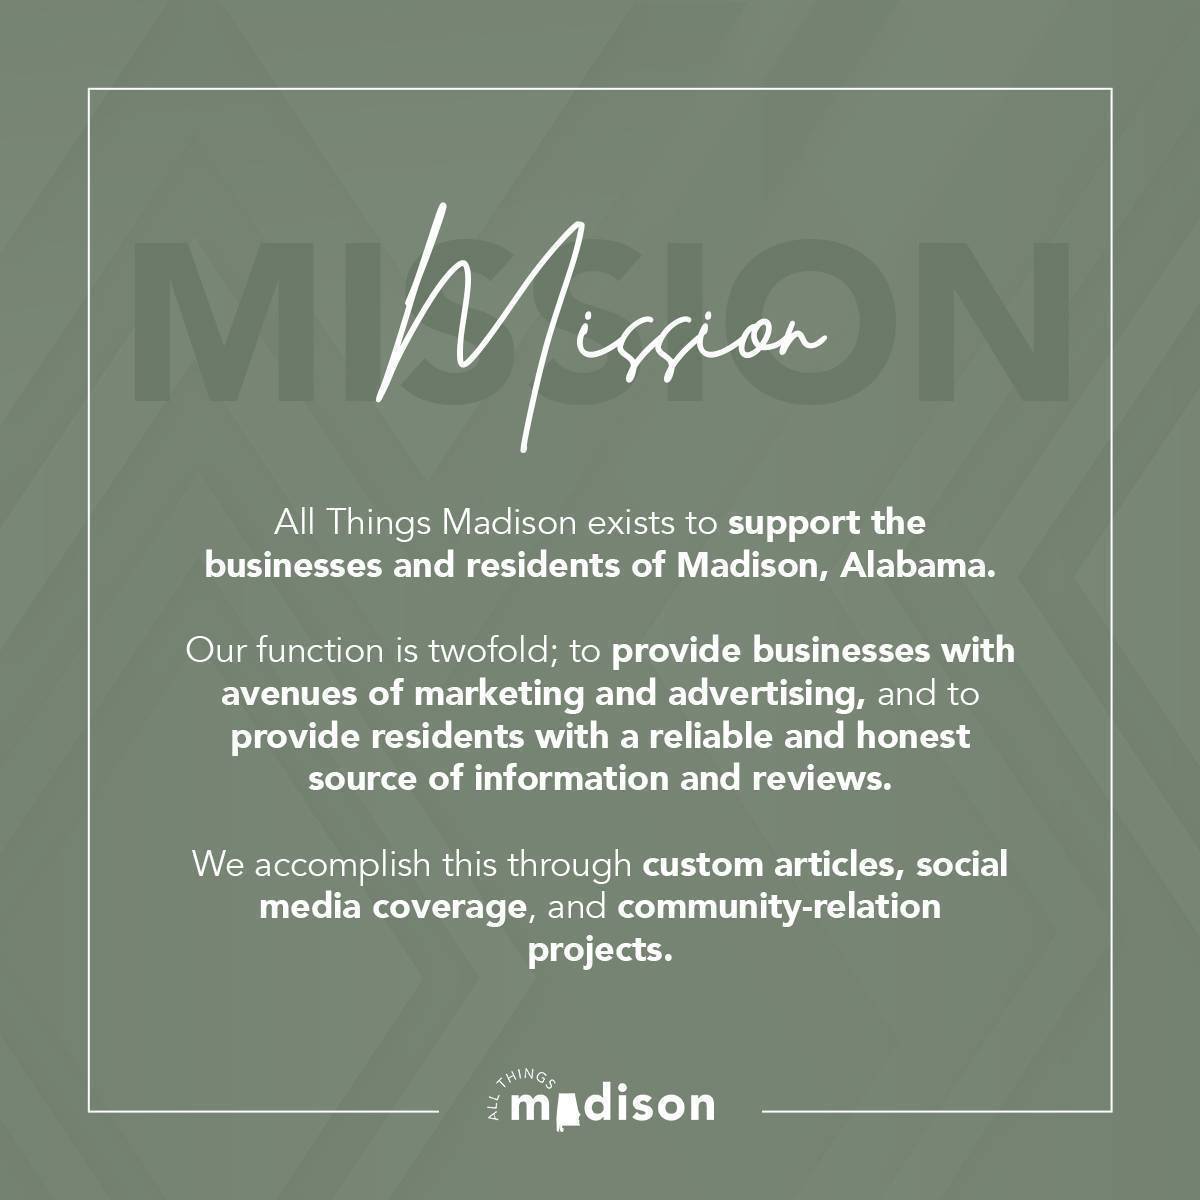 All Things Madison | The Mission, Vision, and Values of All Things Madison